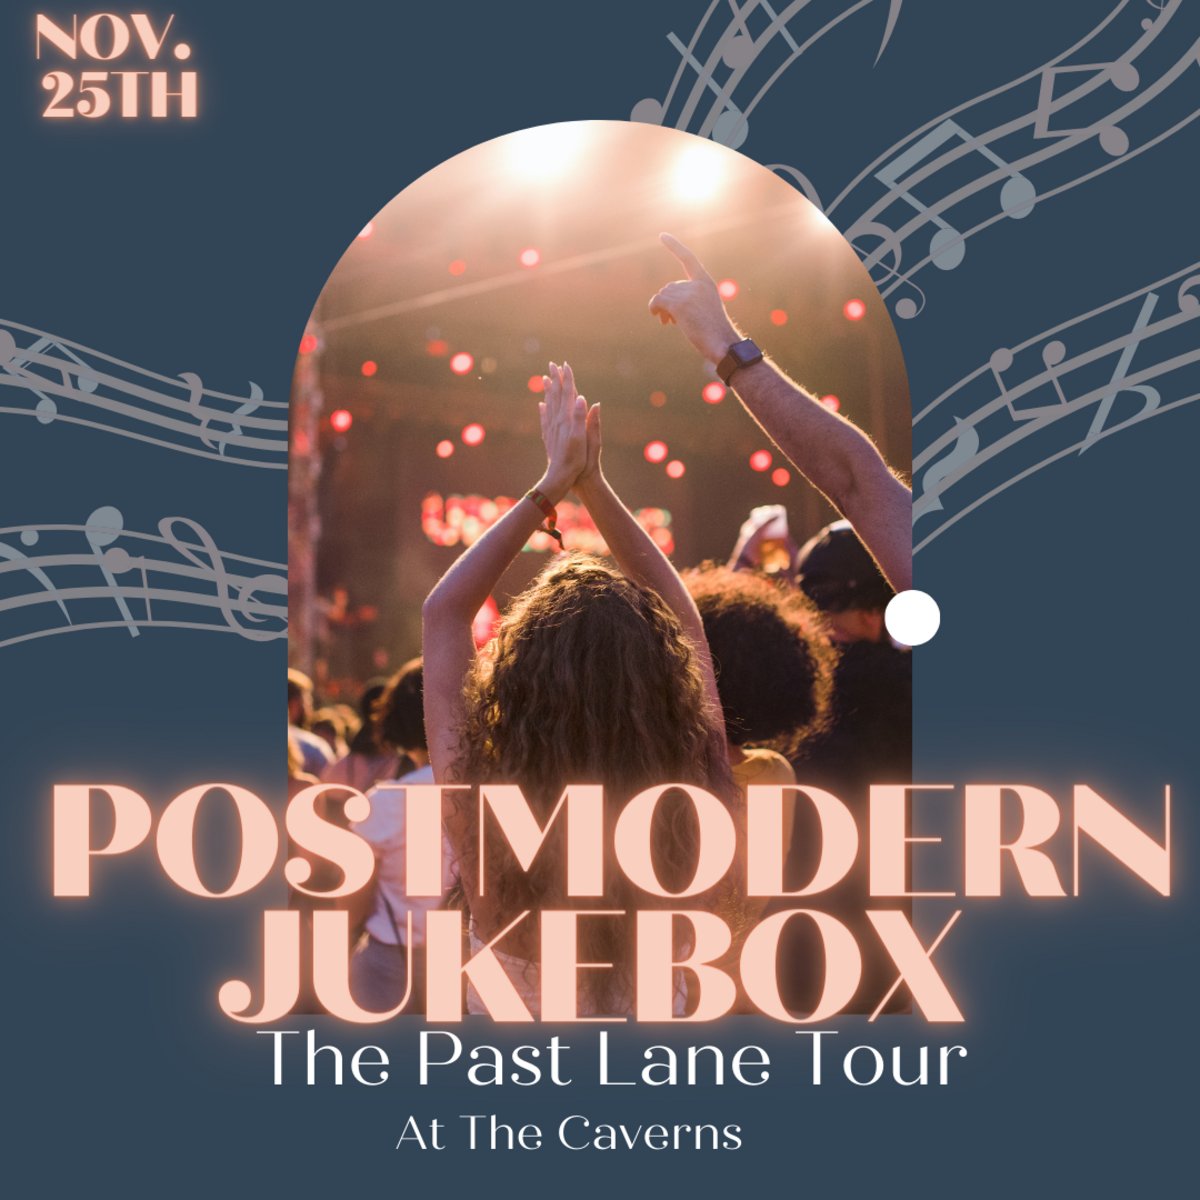 Don't miss out on taking on a journey through time at the #PostmodernJukebox's Life in the Past Lane tour! It's the band will be performing at #TheCaverns. Hear songs from Miley Cyrus, Bruno Mars, Frank Sinatra, and more! For tickets, go to bit.ly/3FMZz6v.